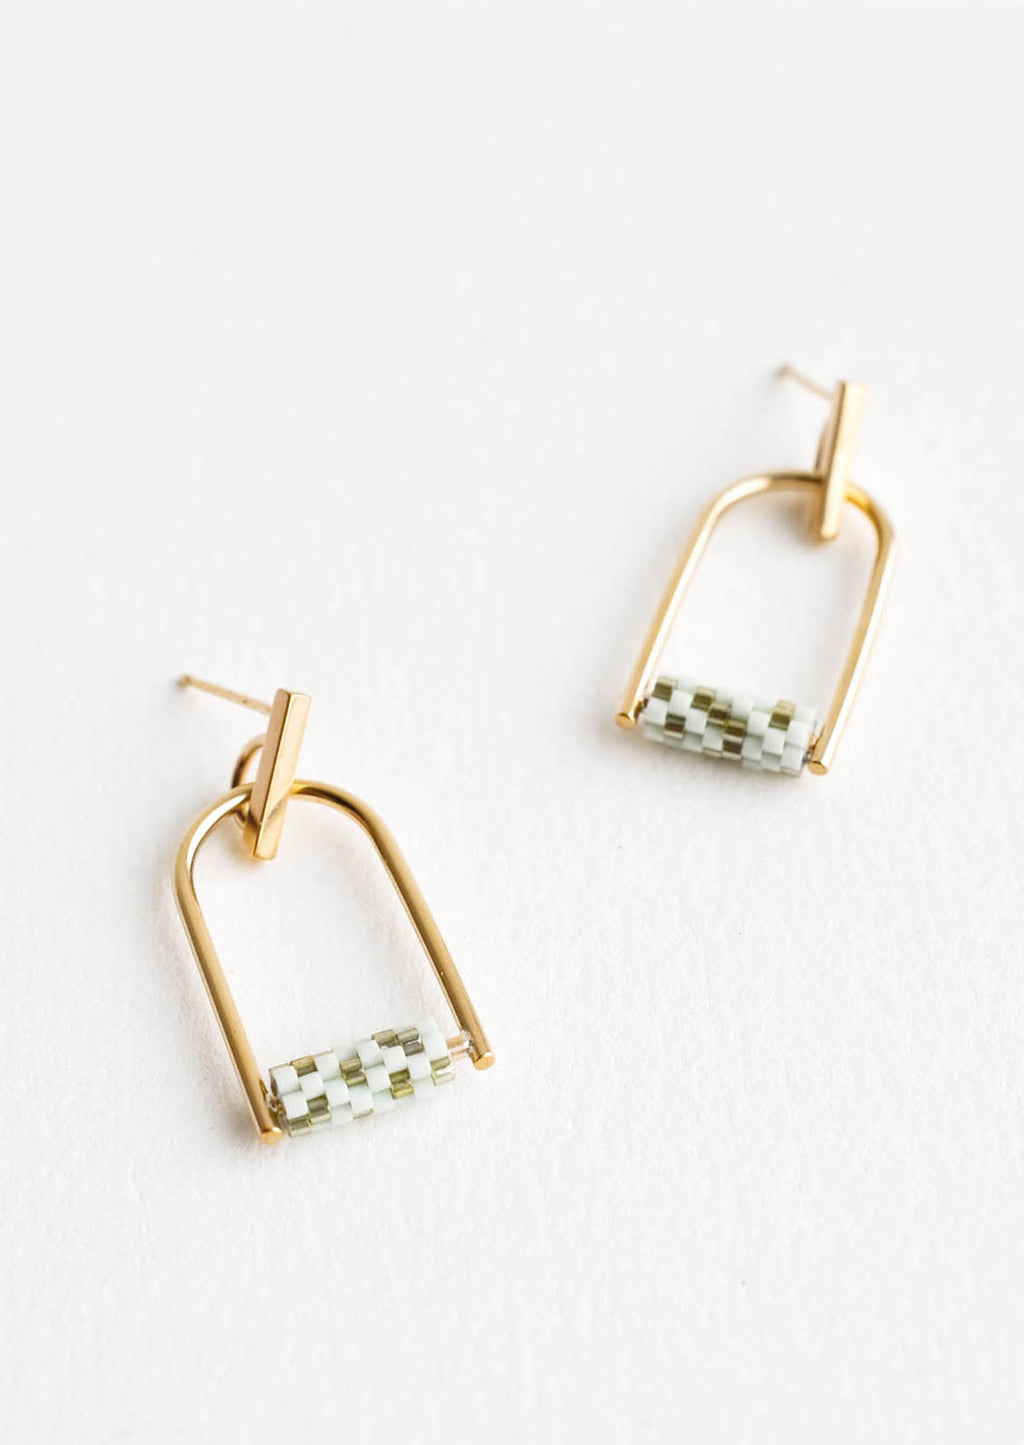 1: Arced gold post back earrings with mint and olive green beads closing off the arc.